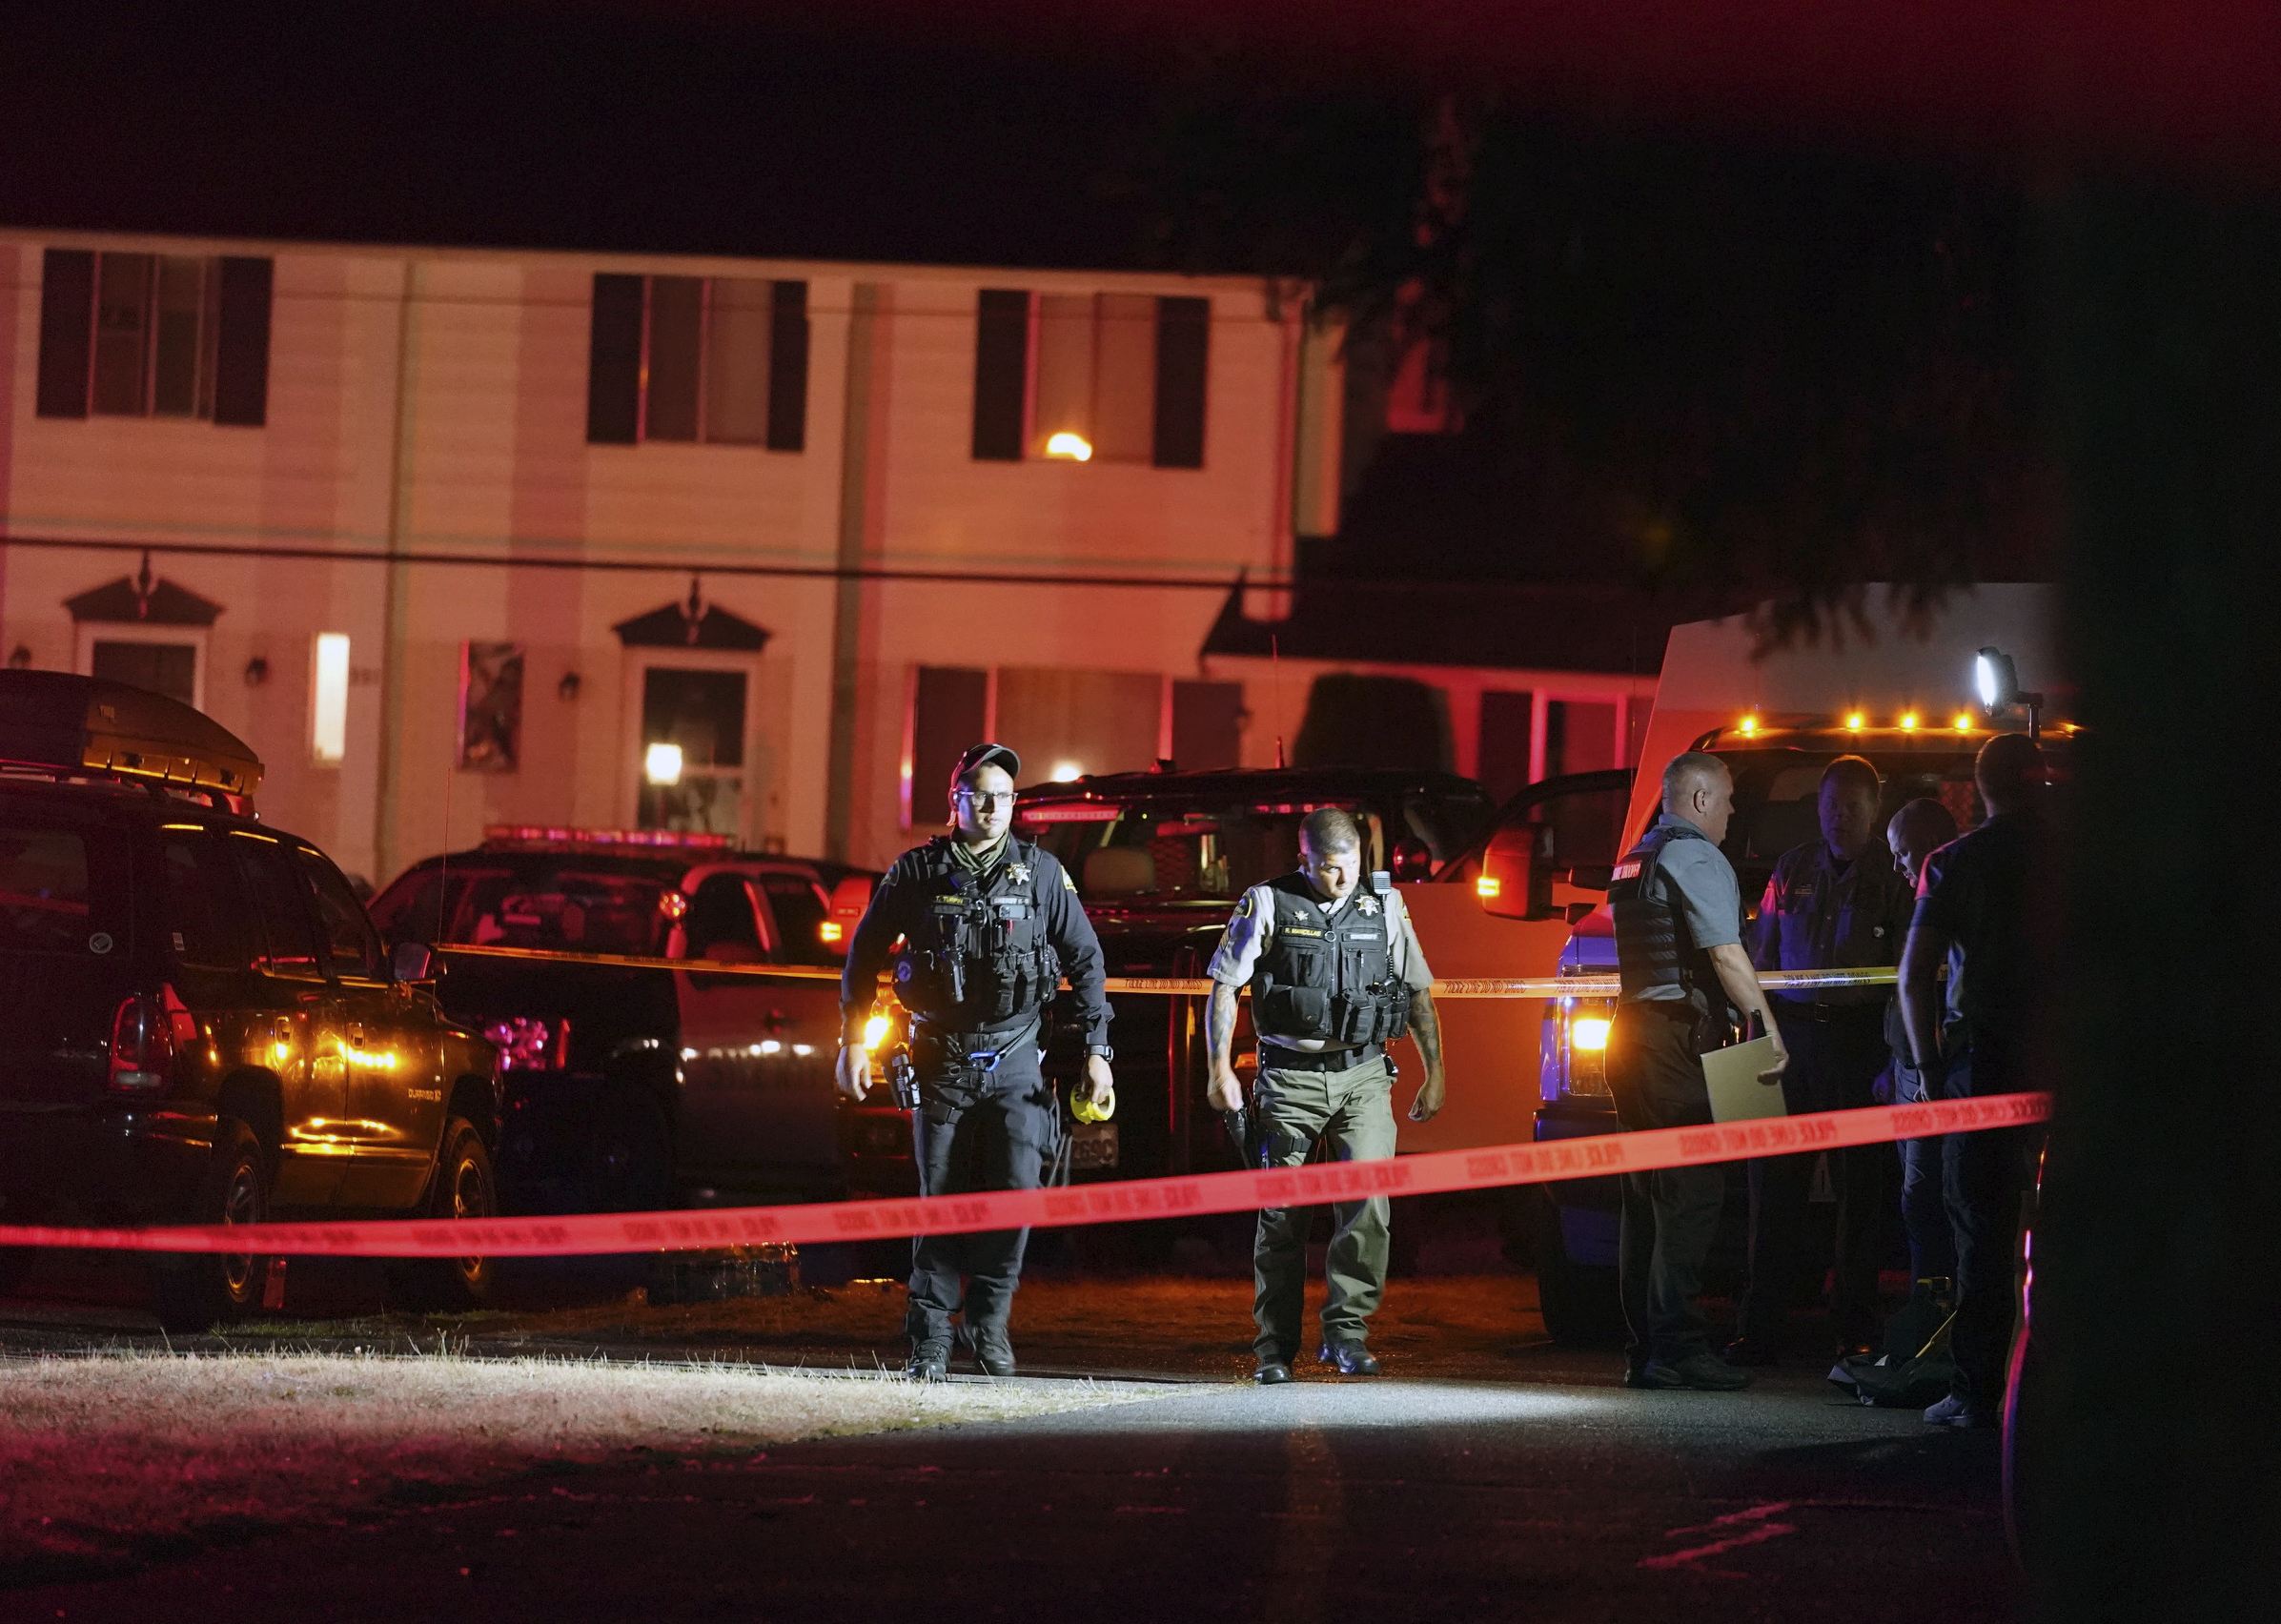 Police officials work at a scene where a man suspected of fatally shooting a supporter of a right-wing group in Portland, Ore., last week was killed as investigators moved in to arrest him in Lacey, Wash., Thursday, Sept. 3, 2020. Michael Reinoehl, 48, was killed as a federal task force attempted to apprehend him in Lacey, a senior Justice Department official said. Reinoehl was the prime suspect in the killing of 39-year-old Aaron “Jay” Danielson, who was shot in the chest Saturday night, the official said.